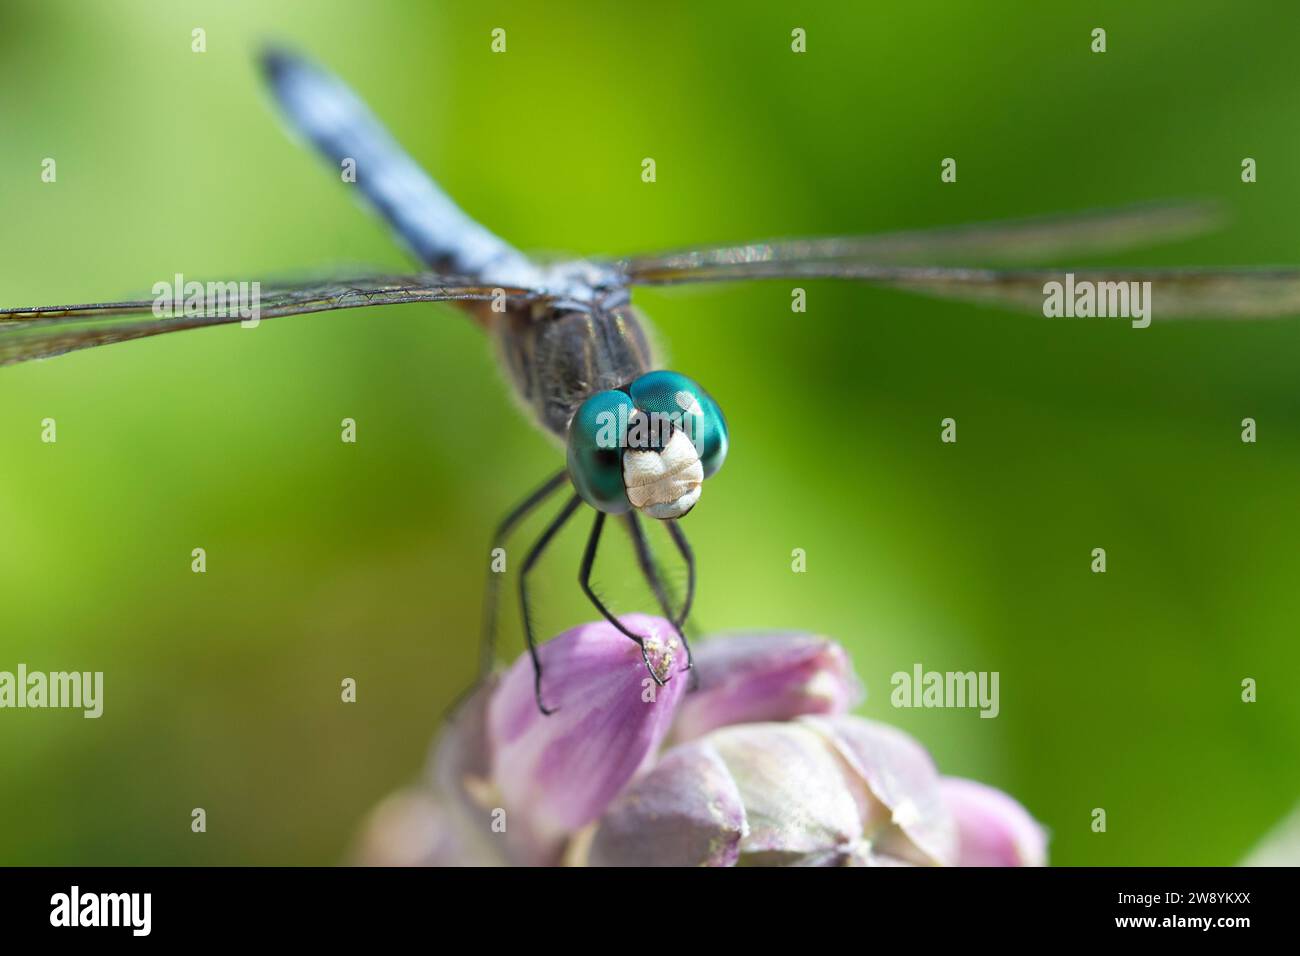 Dragonfly on the top of the pink flower looks in the camera smiling. Green background. Detailed eyes. Stock Photo